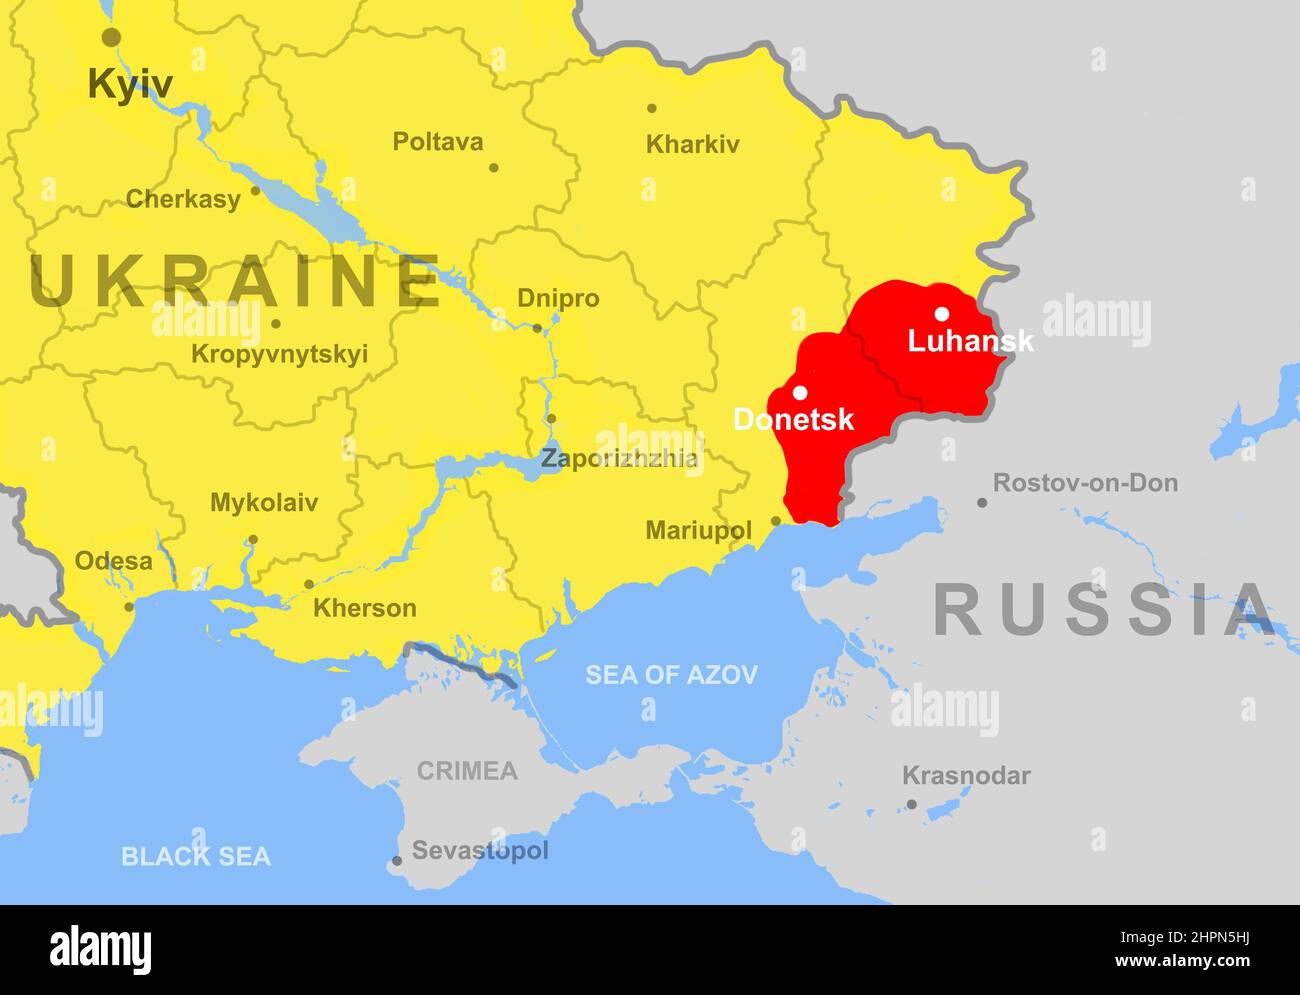 Ukraine on Europe map, Donetsk and Luhansk regions (Donbass). Political outline map with Russia border, Crimea, Black and Azov Seas. Concept of Ukrain Stock Photo